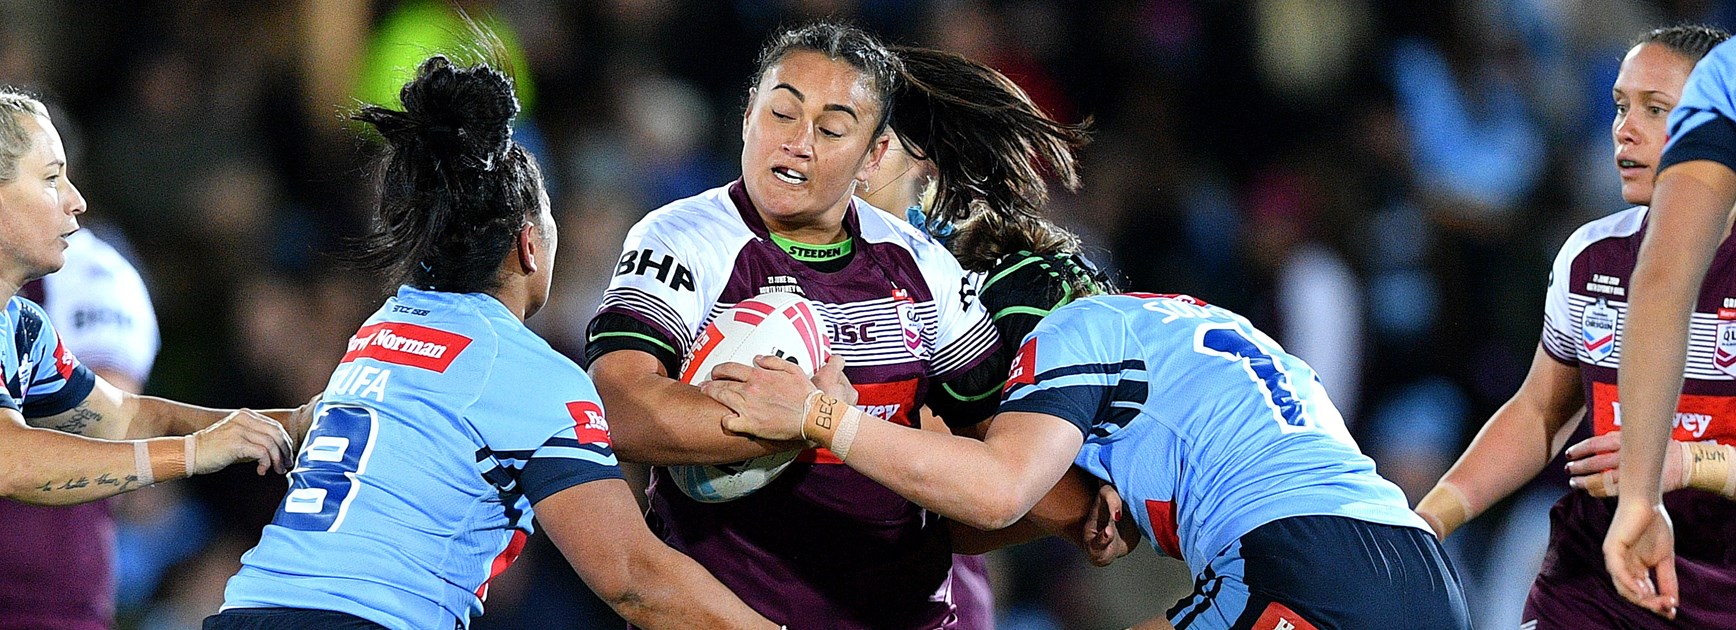 Annette Brander in action for the Maroons in 2019.